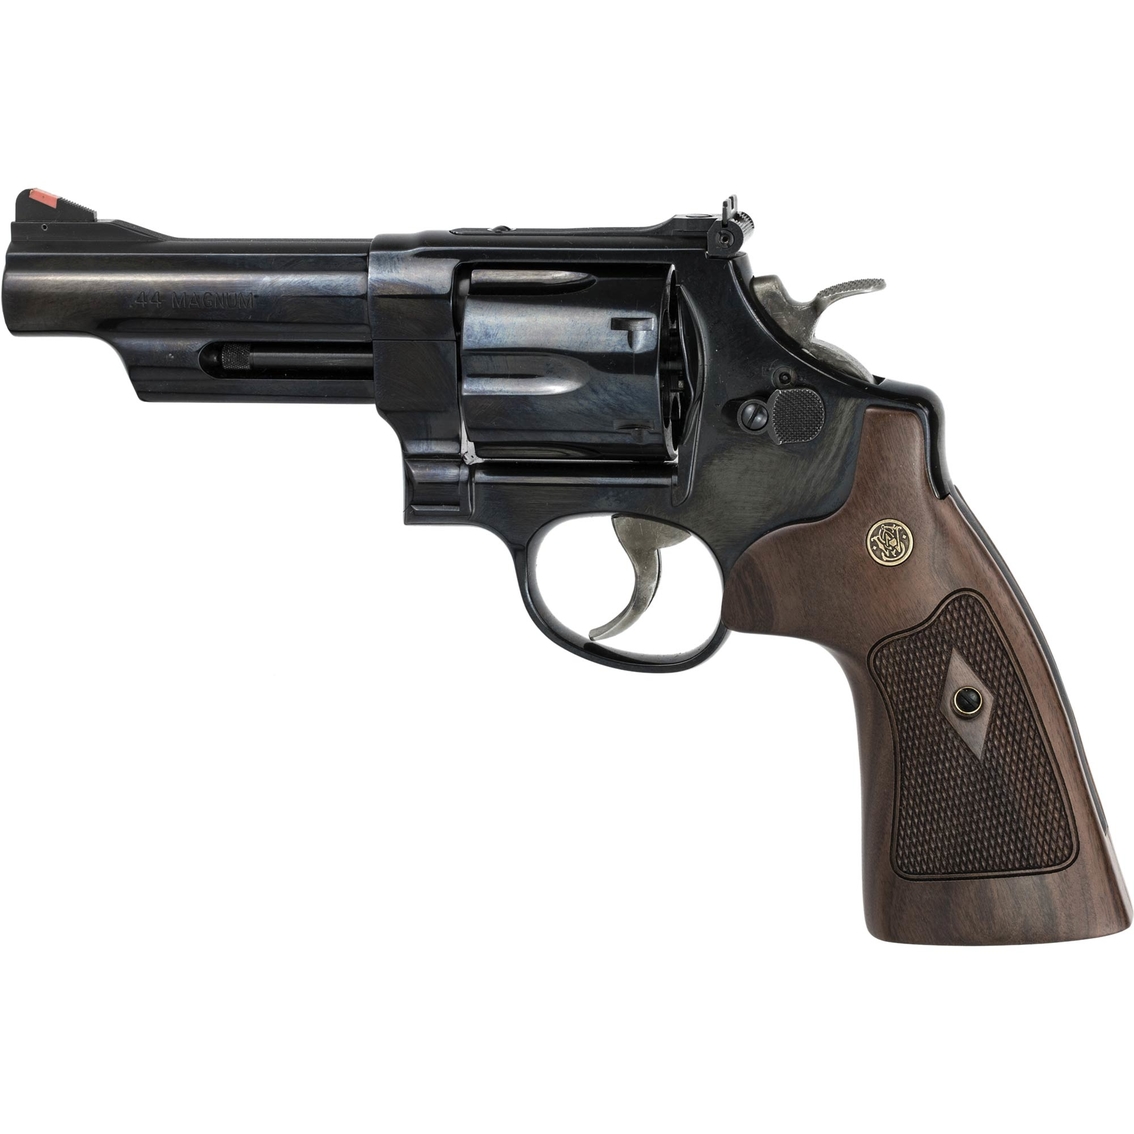 S&W 29 44 Mag 4 in. Barrel 6 Rds Revolver Blued - Image 2 of 2